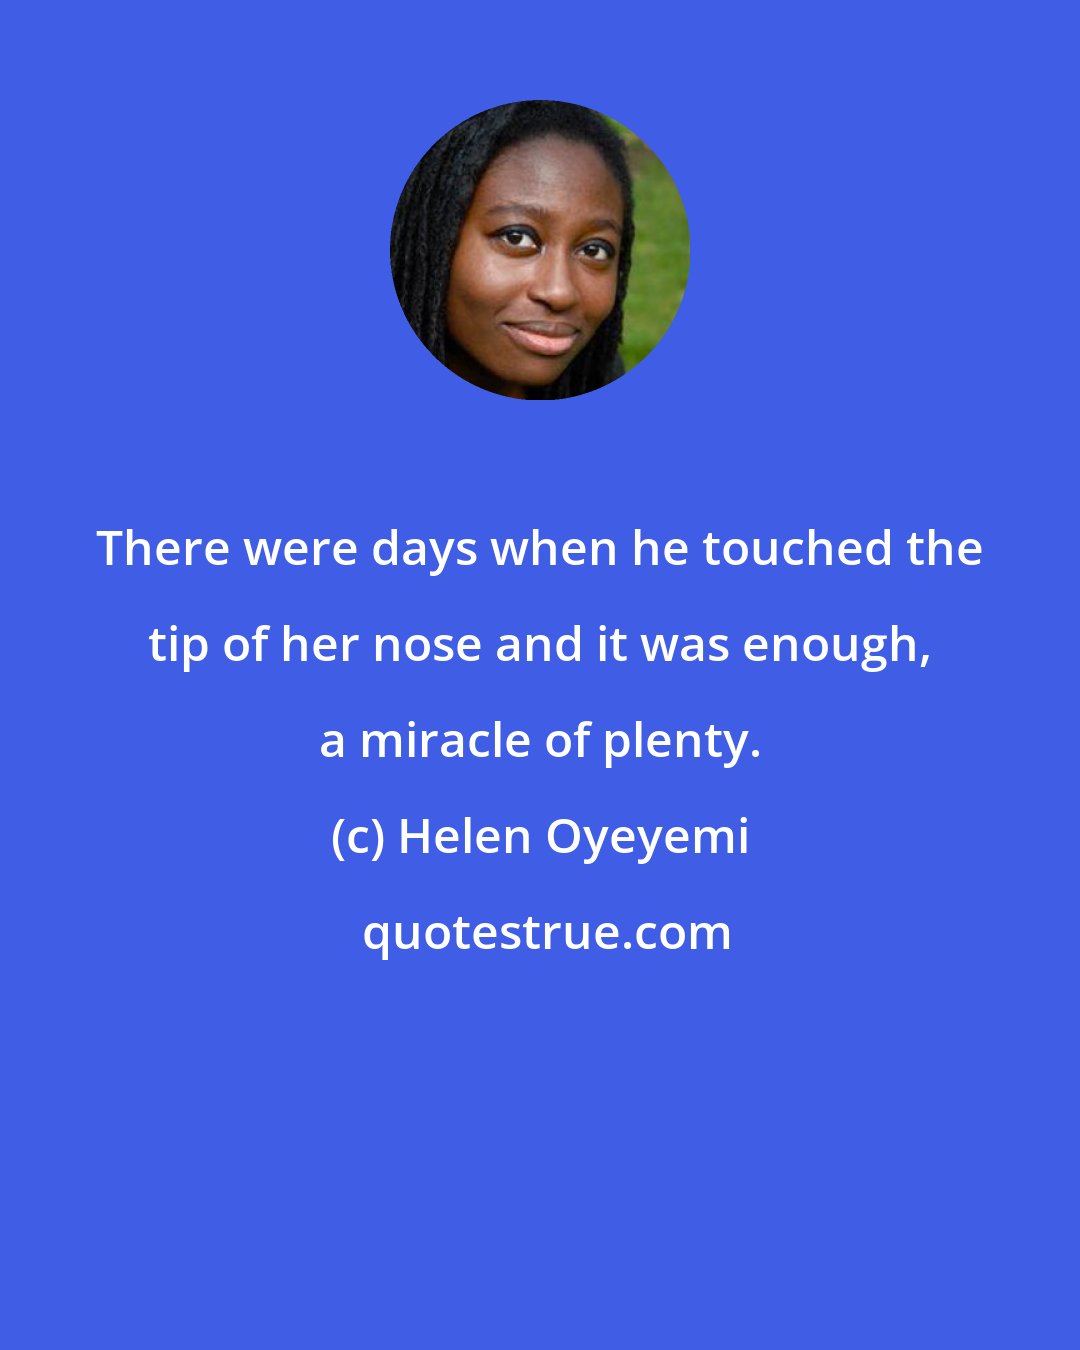 Helen Oyeyemi: There were days when he touched the tip of her nose and it was enough, a miracle of plenty.